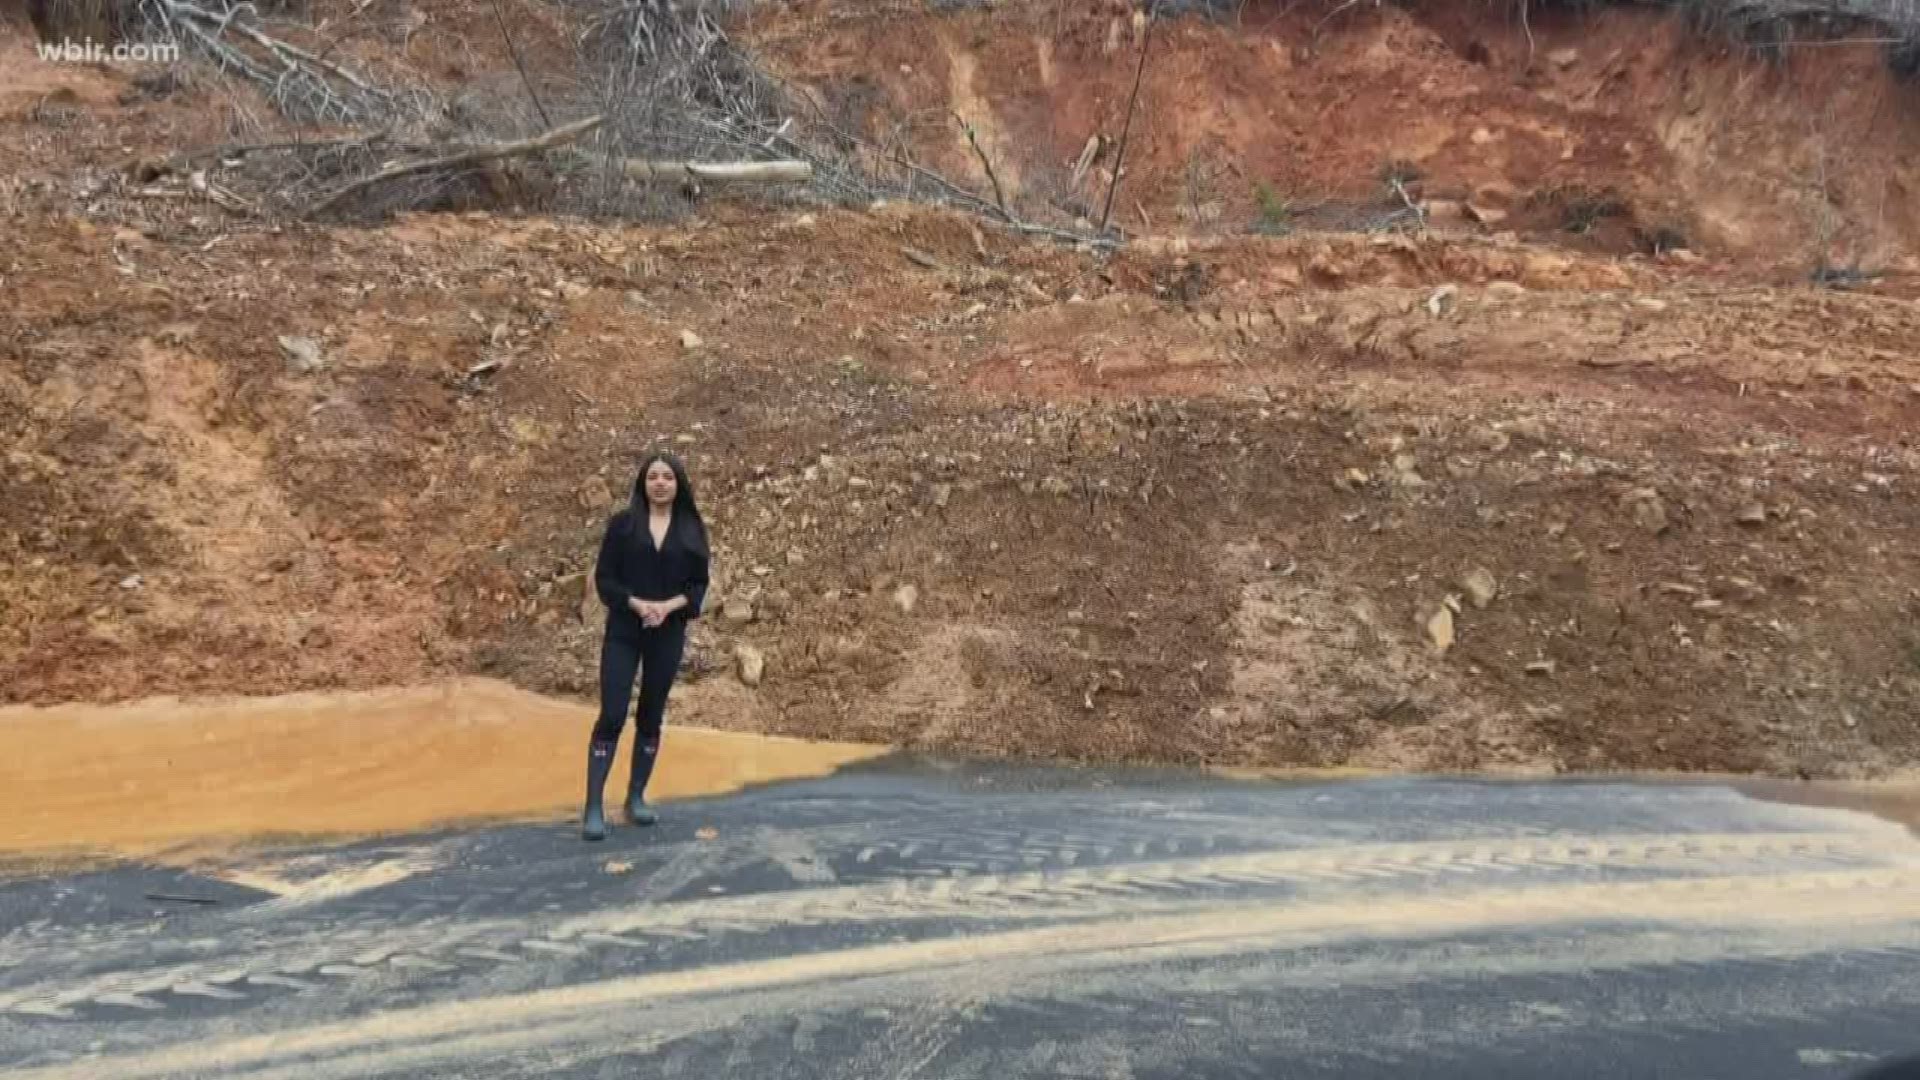 The couple who lives right next to the landslide says each day it creeps closer, and they're afraid if they don't get help soon it will make it to their home.